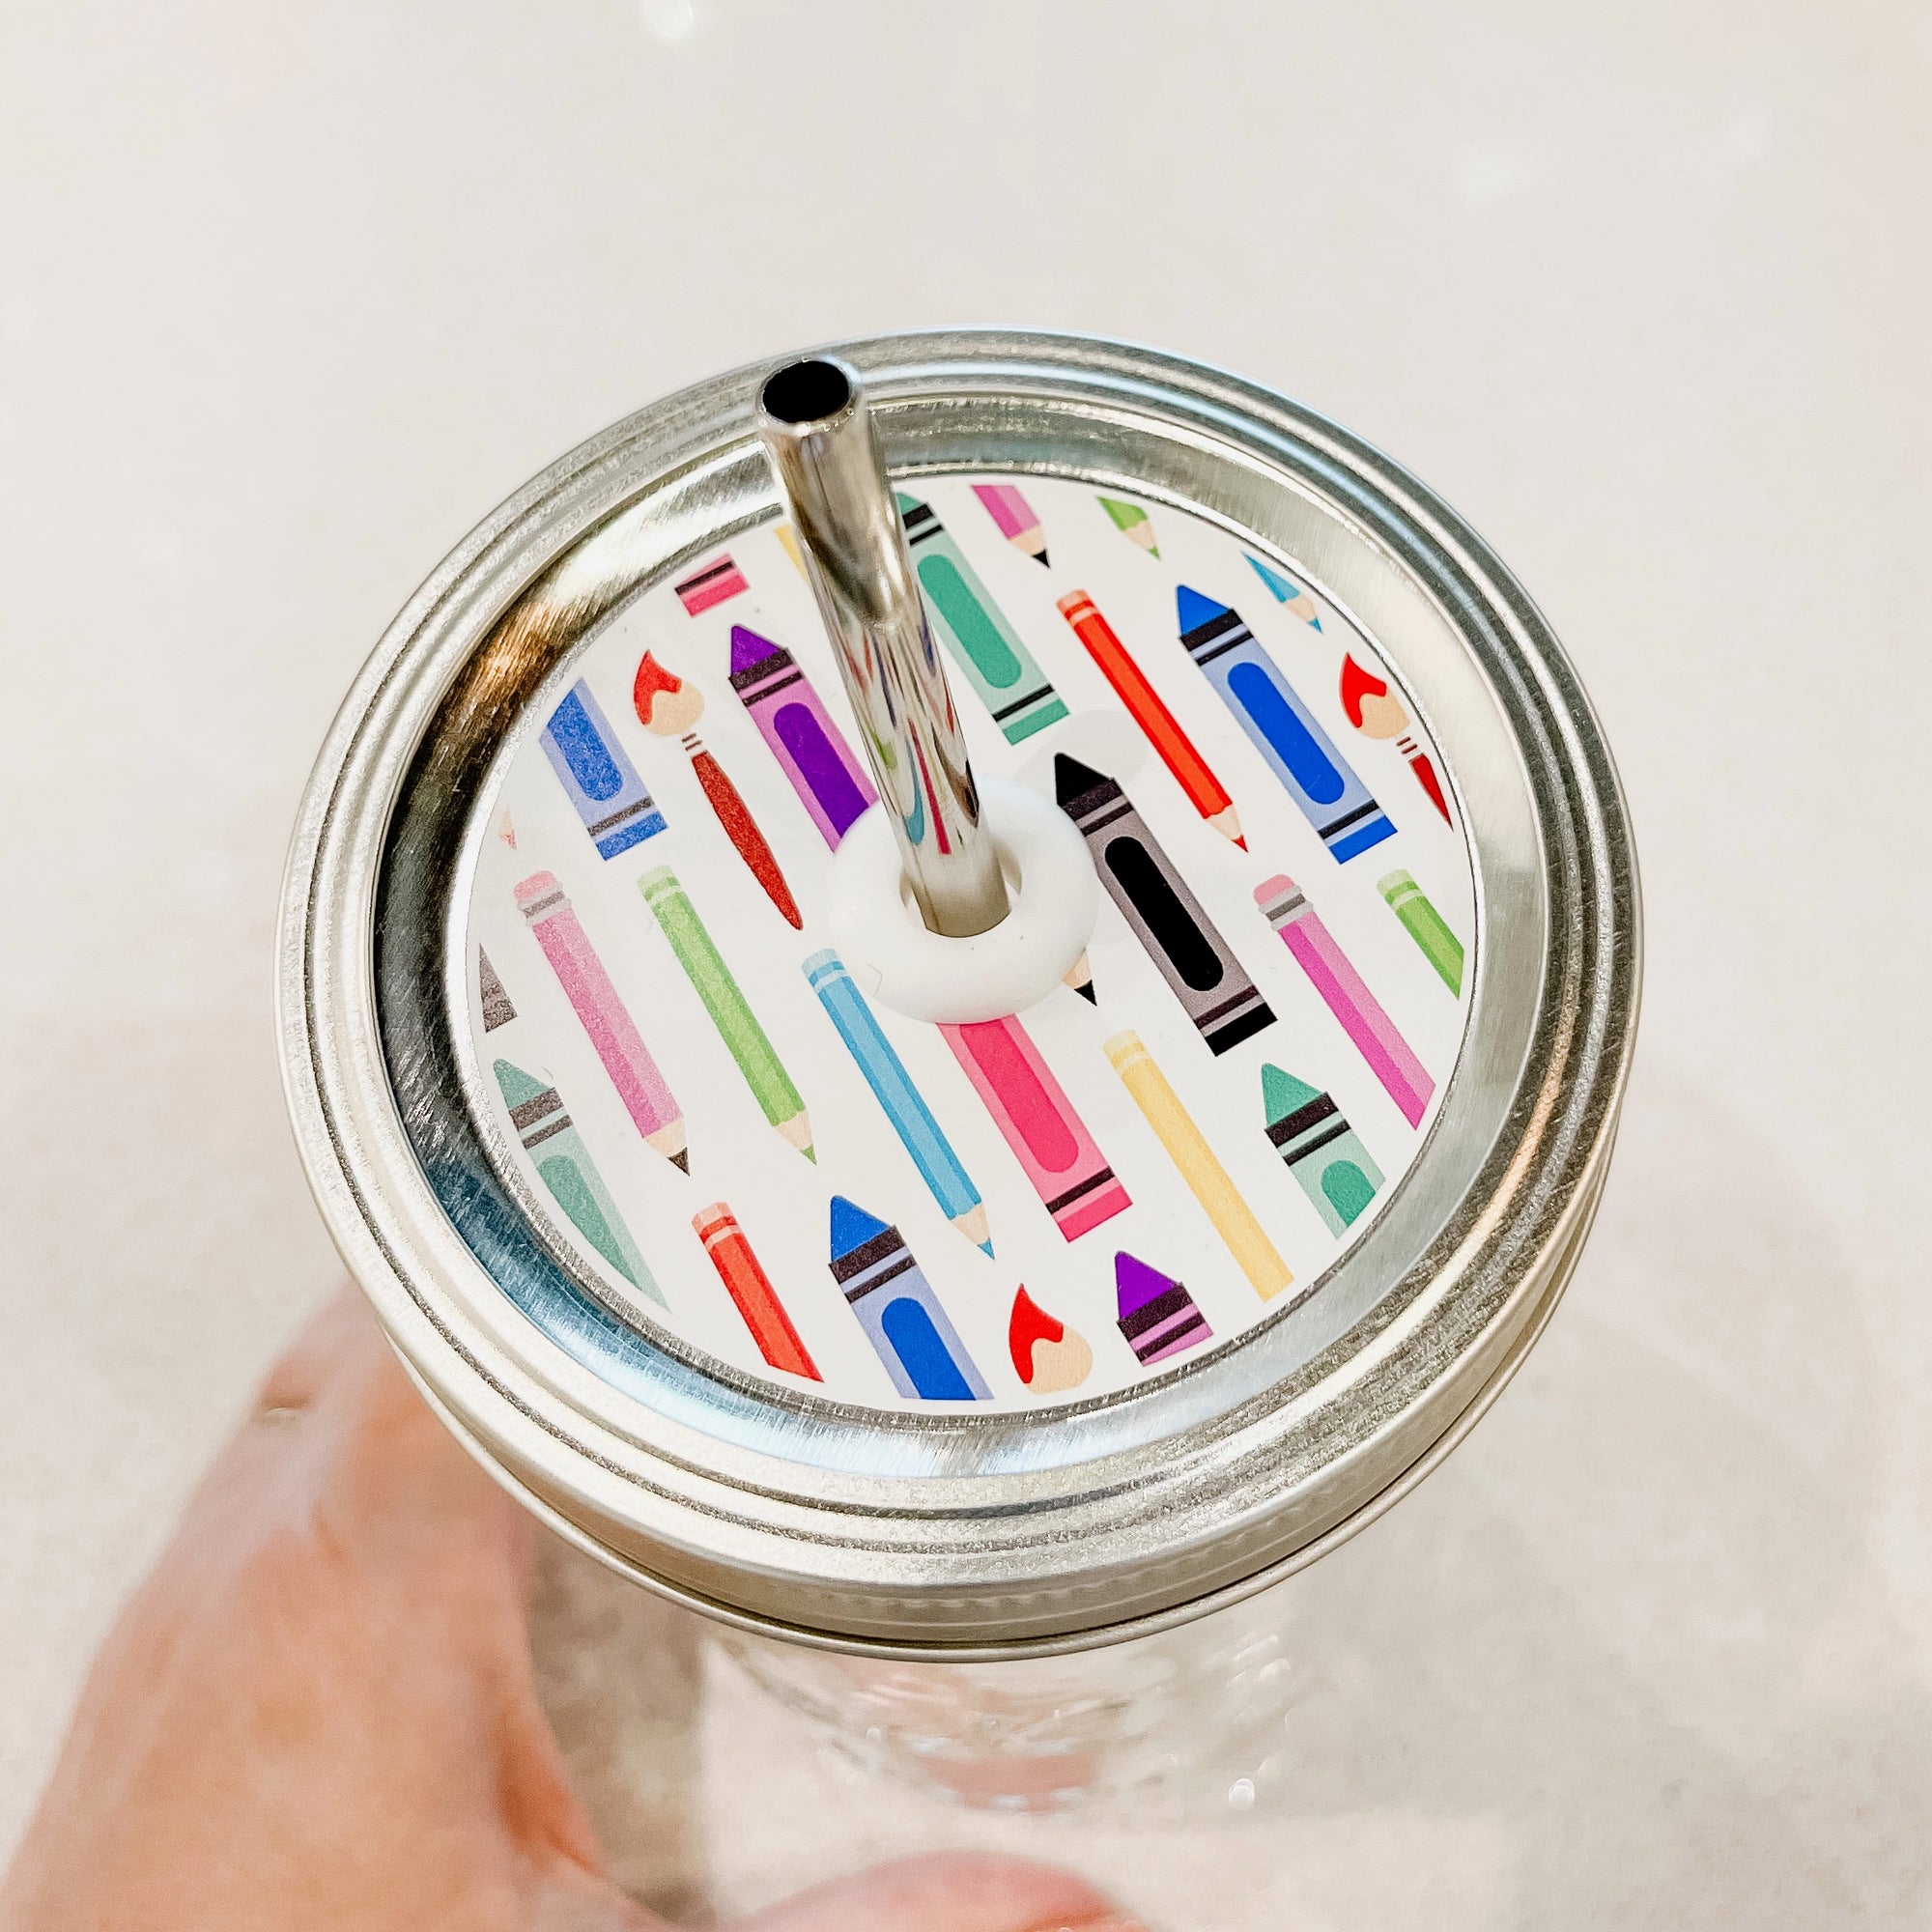 A Patterned Mason Jar Straw Lid with Colourful Pencils & Crayons design